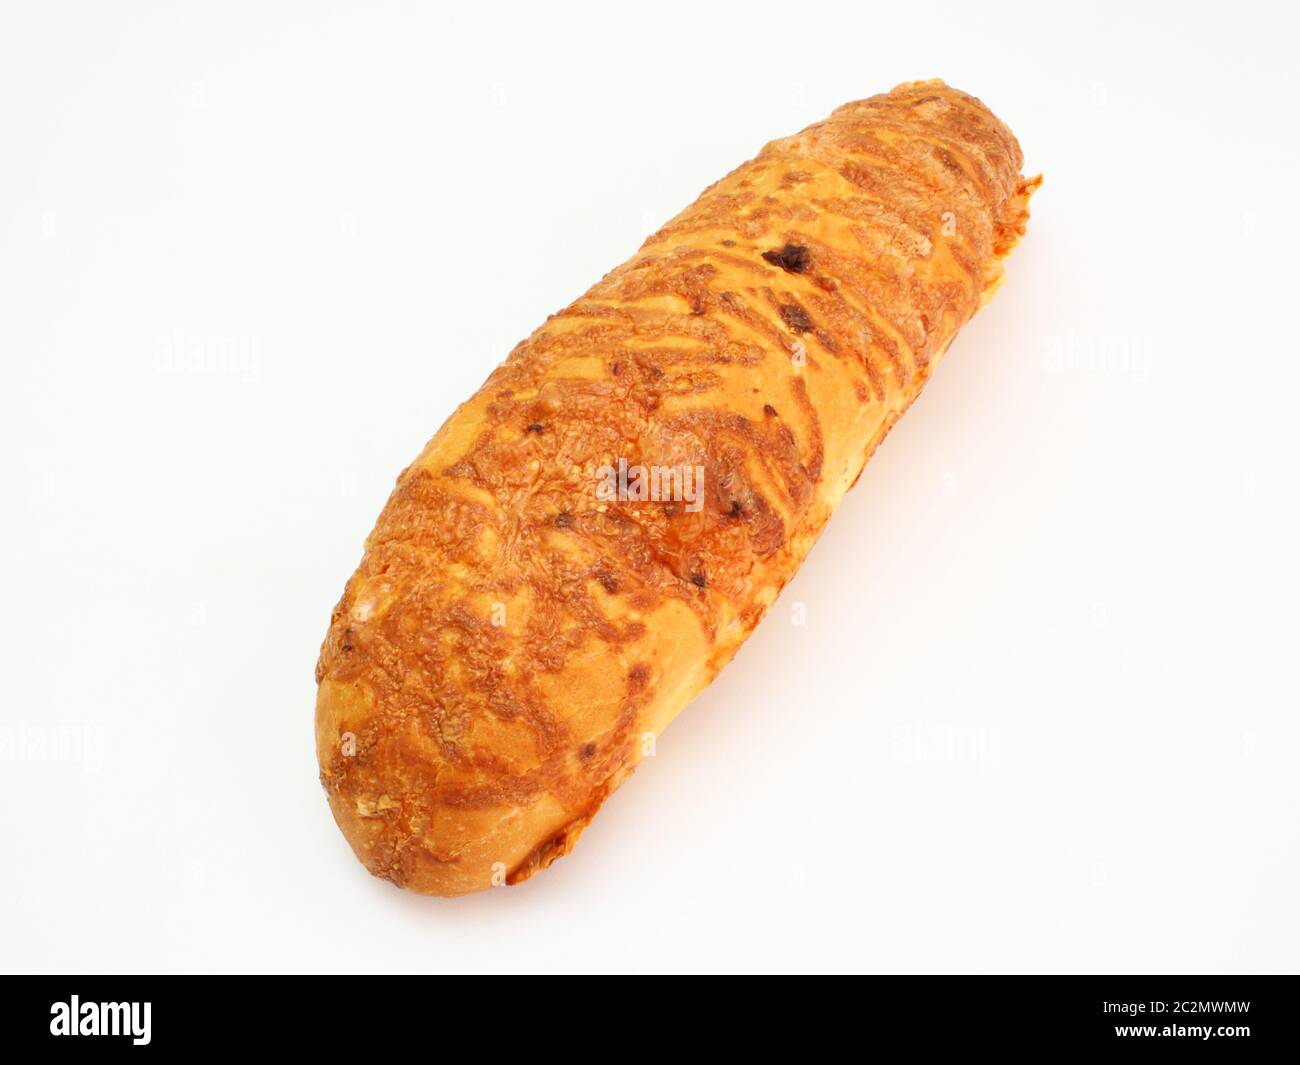 The ruddy long loaf of bread Stock Photo